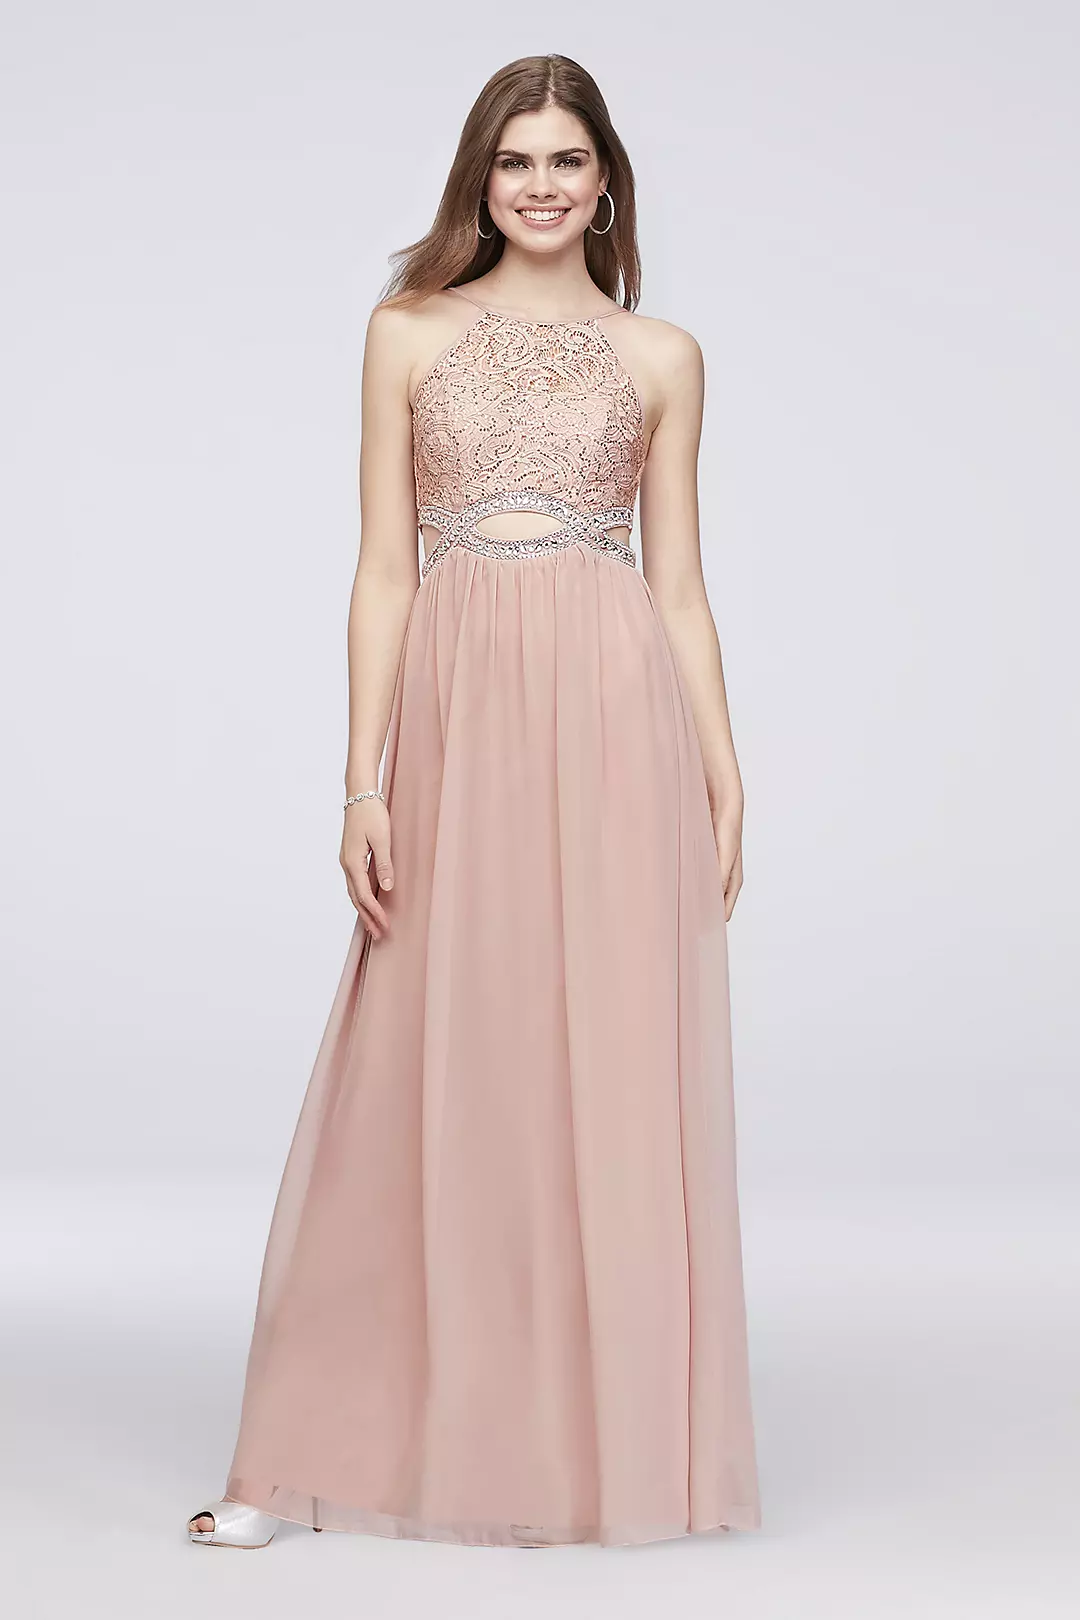 Sequin Lace and Infinity Cutout Chiffon Gown Image